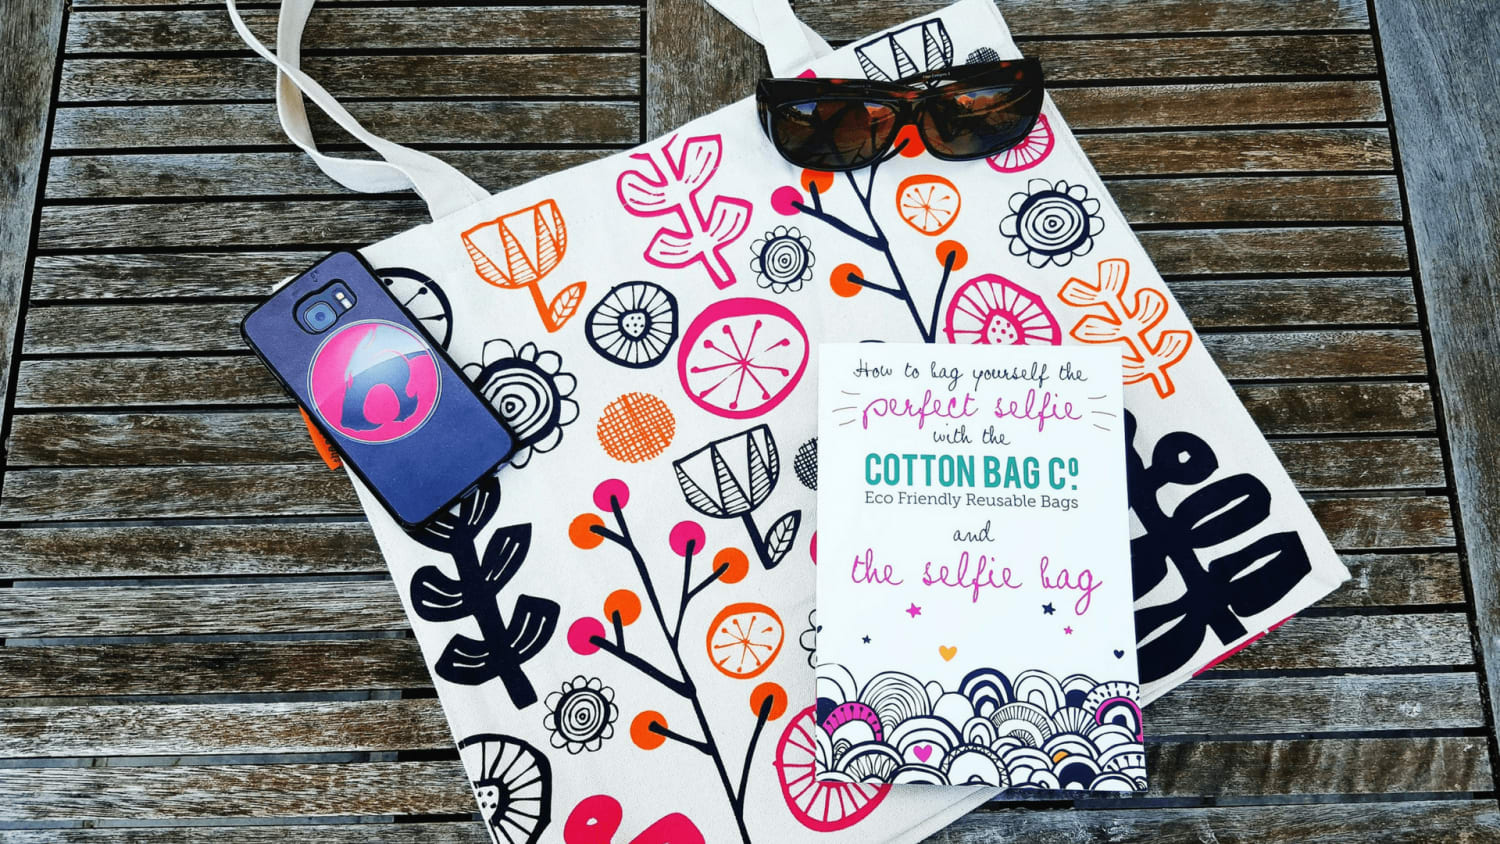 Taking the perfect selfie with Cotton Bag Co's Selfie Bag *